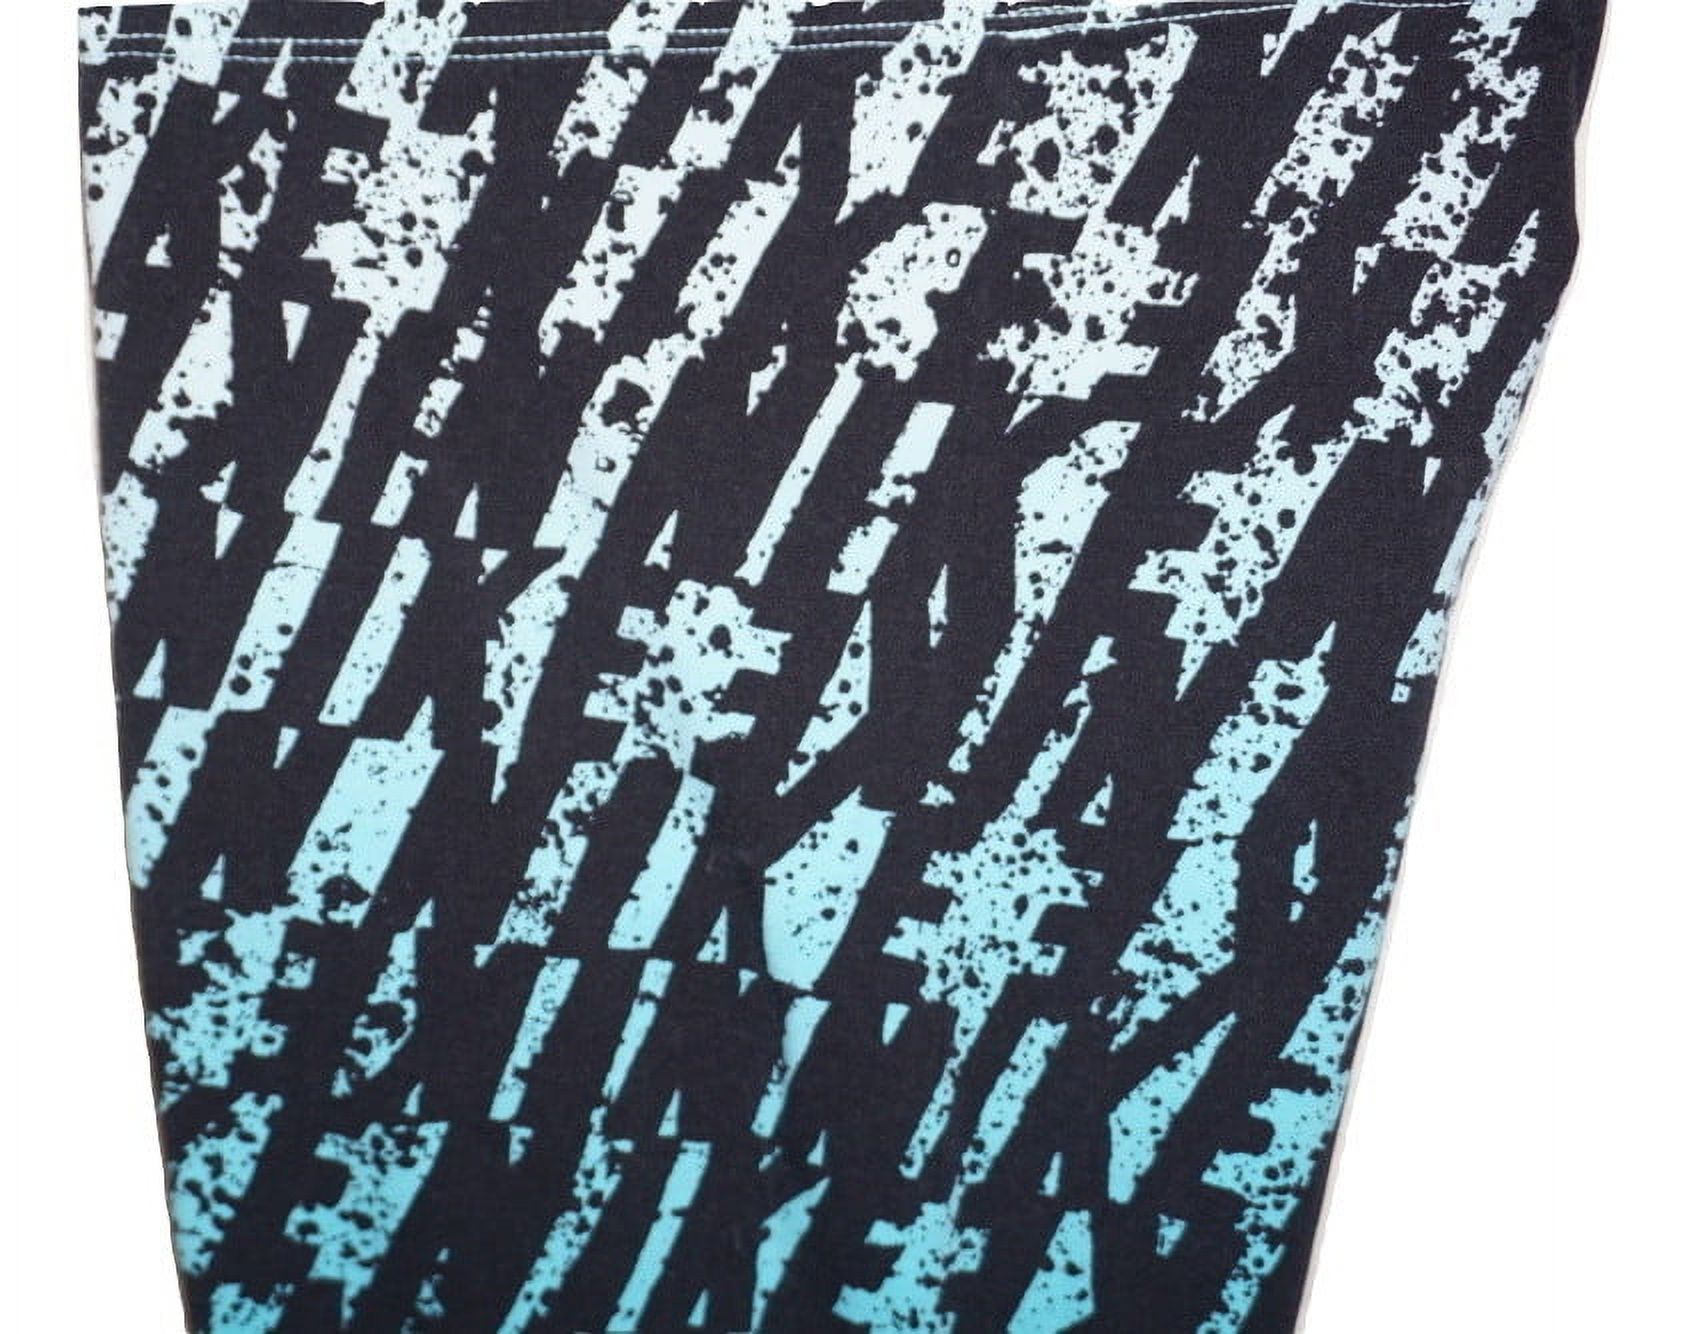 Nike Women's Cotton Club Legging All Over Print Stretch Tights Large - image 3 of 4